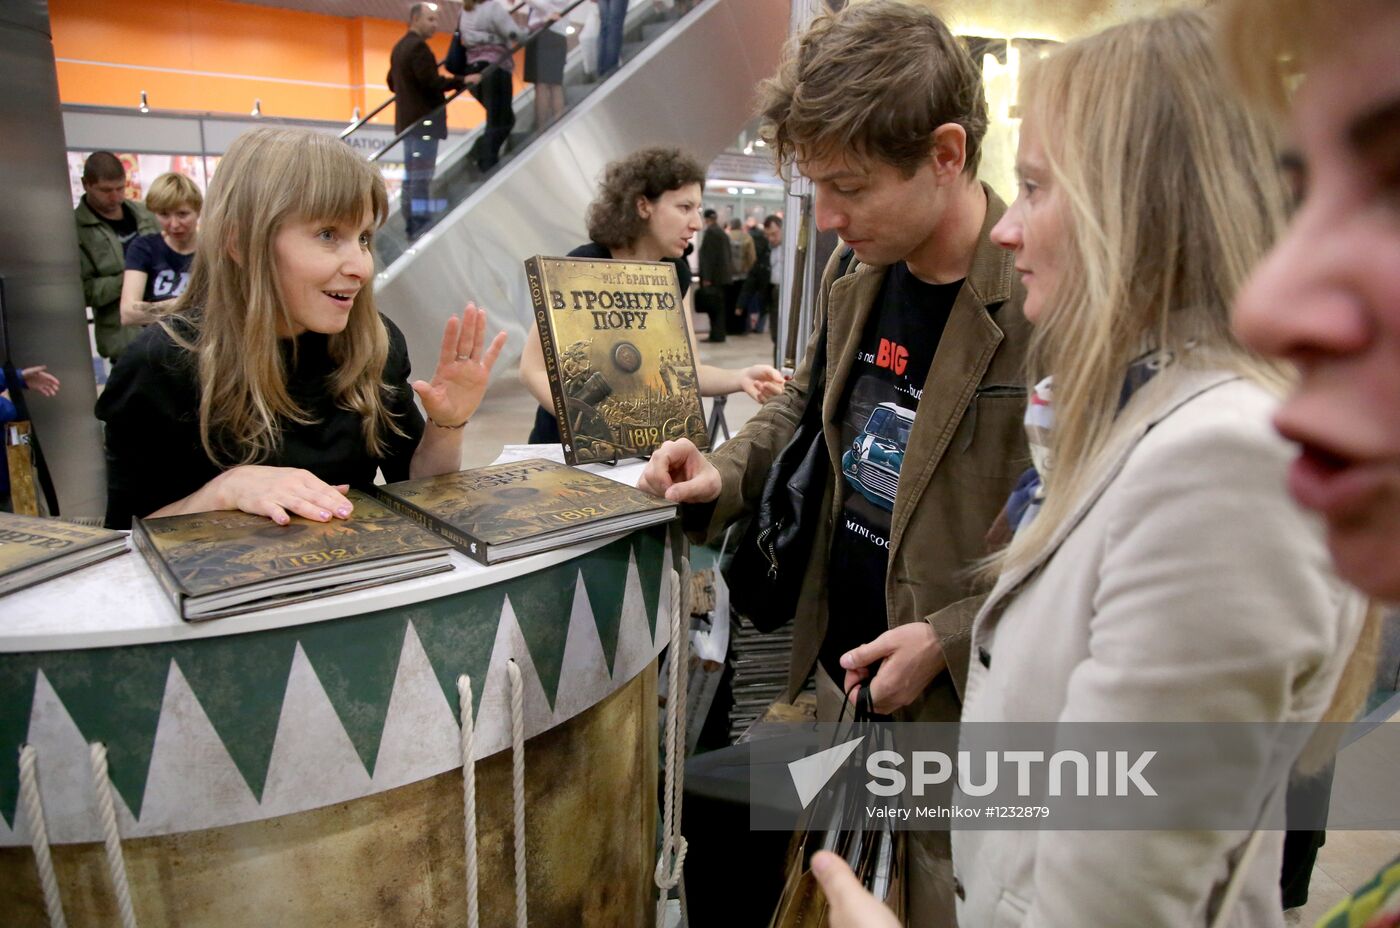 The 25th International Book Fair opens in Moscow